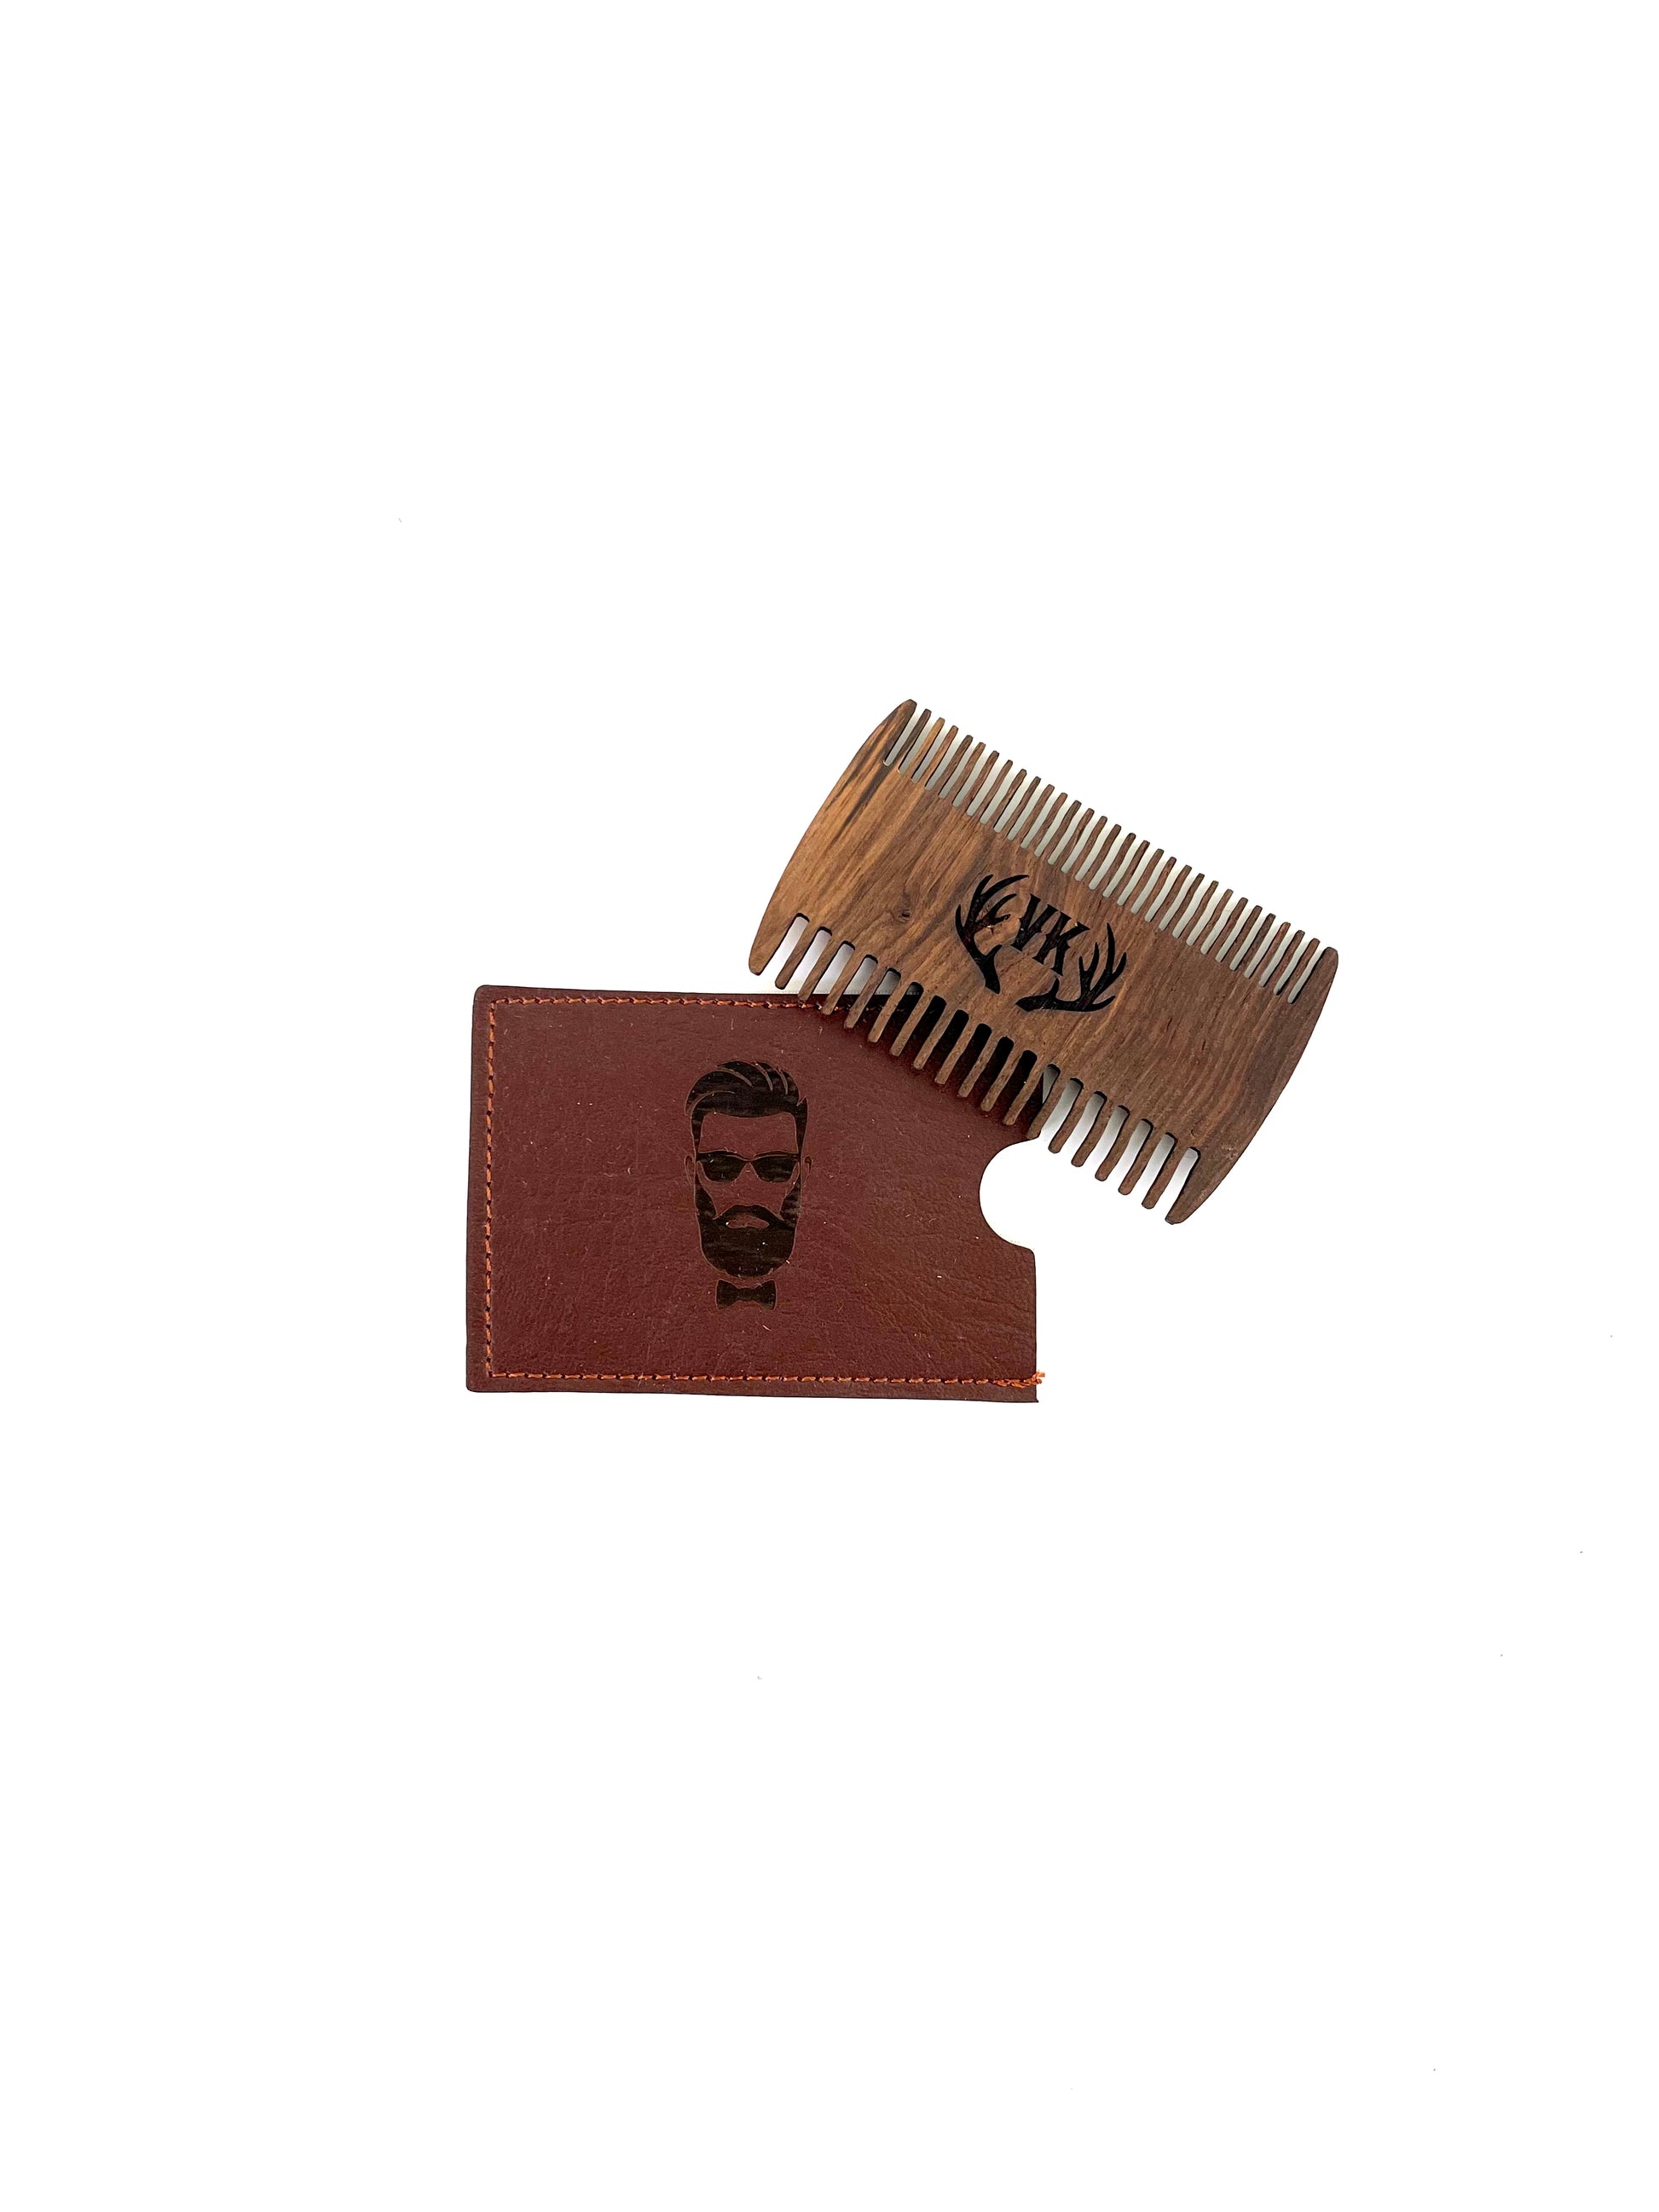 Personalized Wood Beard Comb with Leather Case